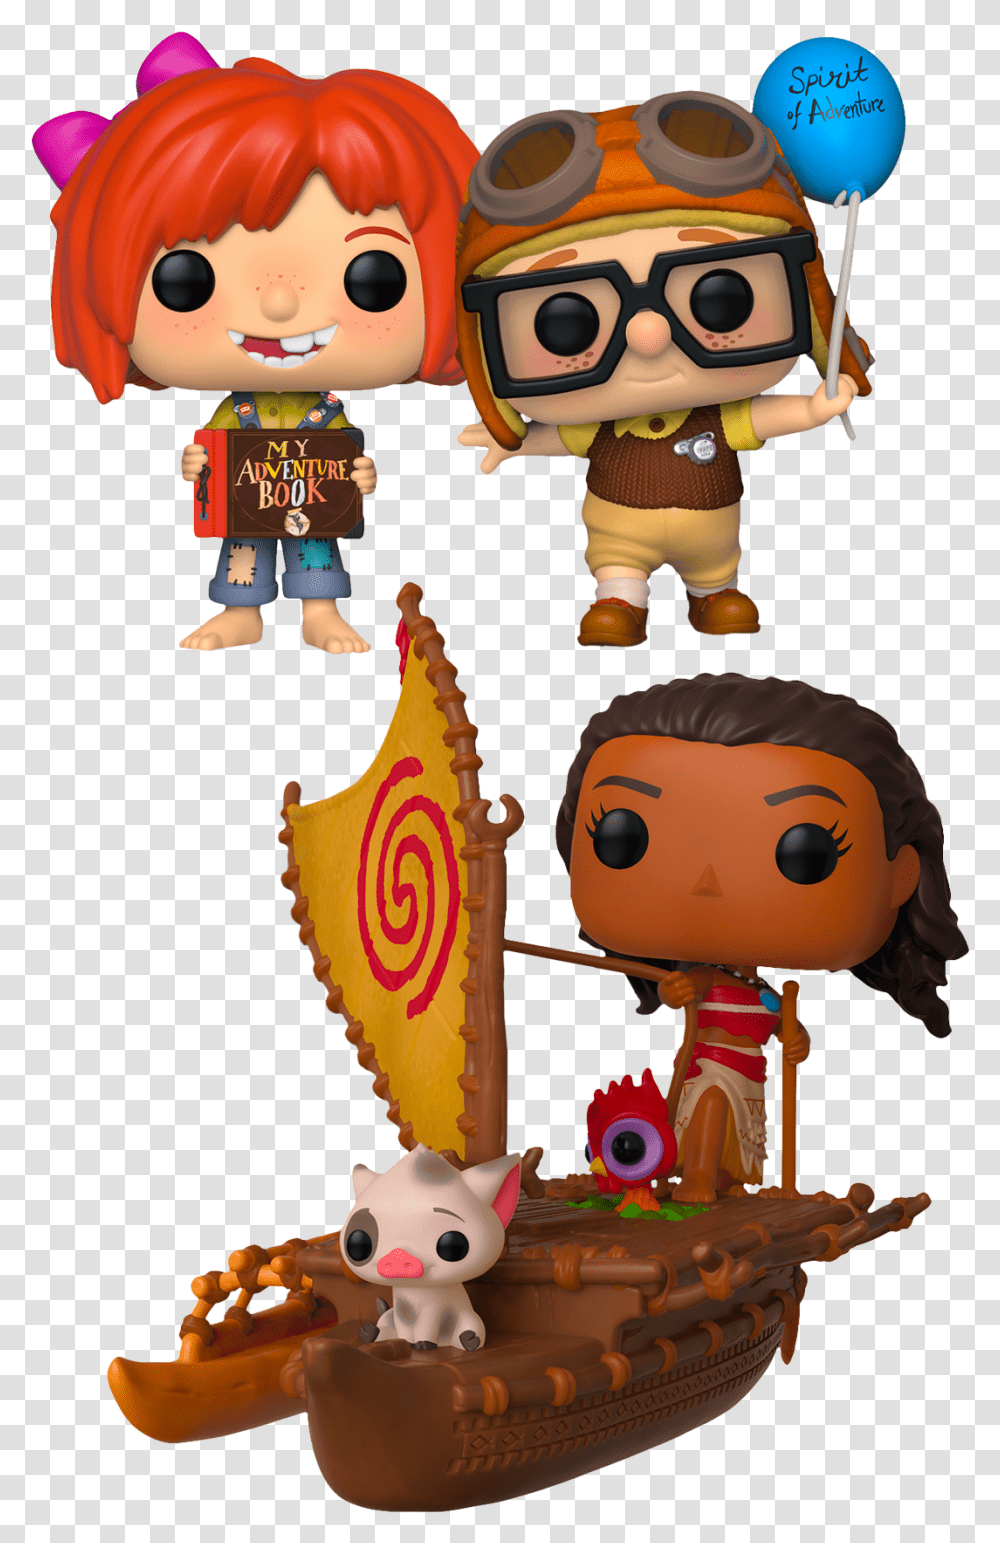 Young Carl Amp Ellie With Moana Funko Pop Vinyl Figure, Toy, Doll, People, Person Transparent Png